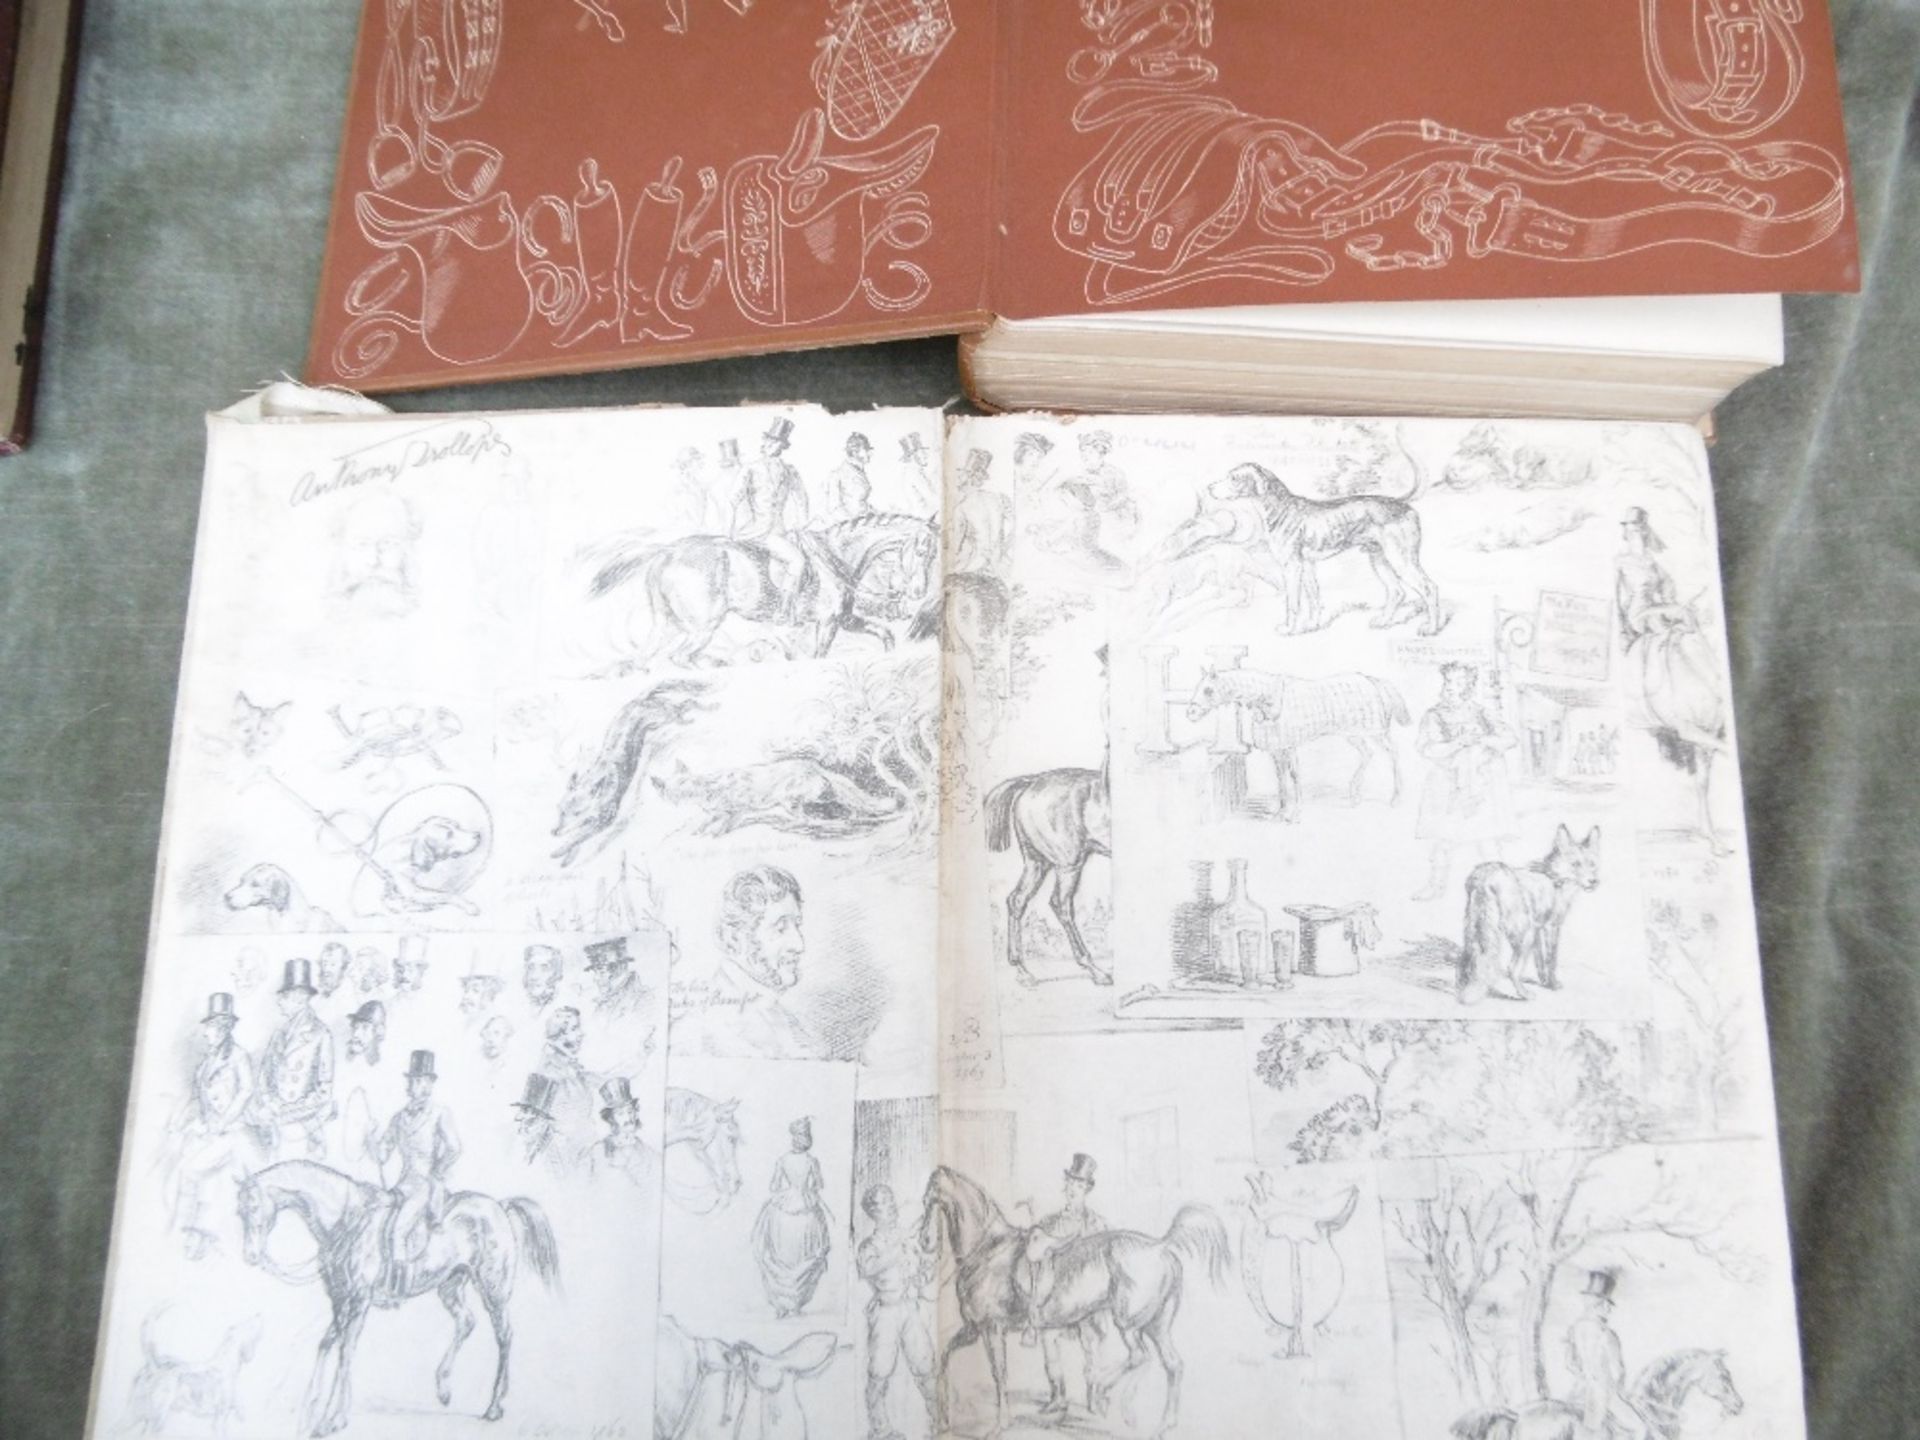 3 books - Book of the Horse, 1946 by Brian Vesey-Fitzgerald; Hunting Sketches by Anthony Trollope; a - Image 2 of 2